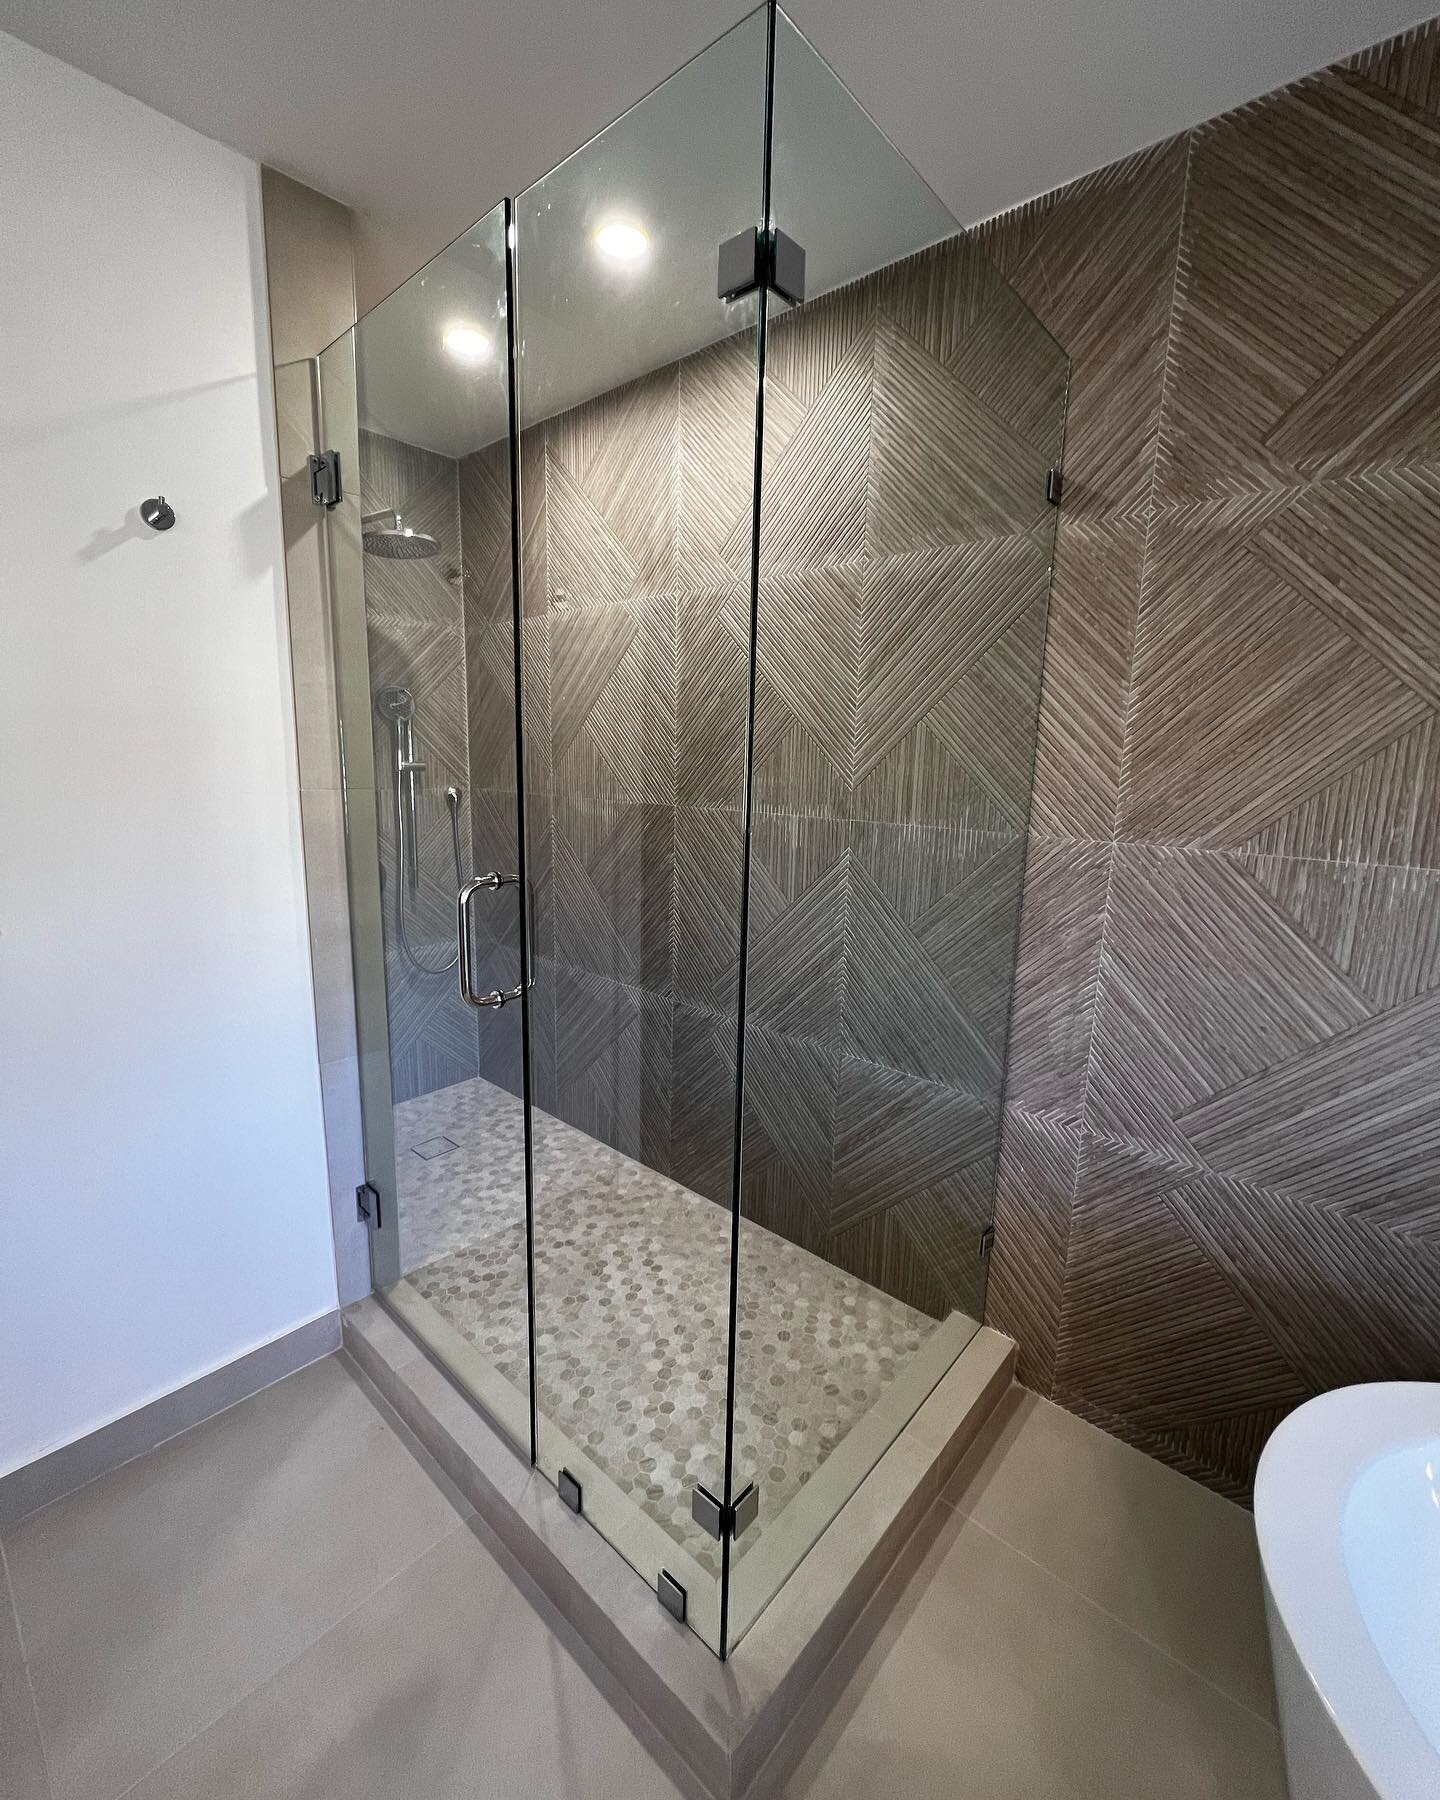 Shower door Saturday. Check out this L shaped shower door that was installed in Aventura FL.